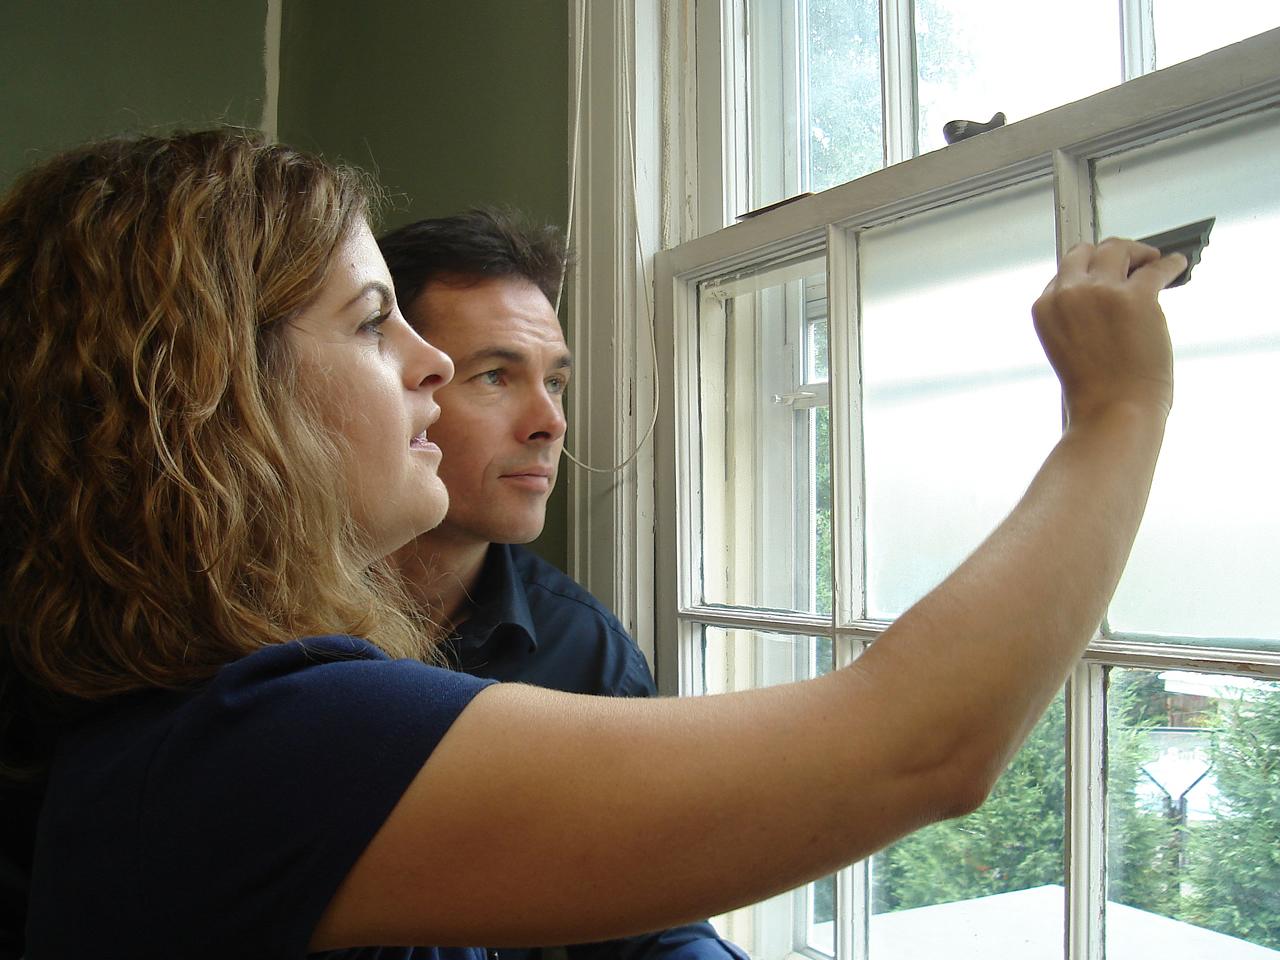 How to install the privacy glass film